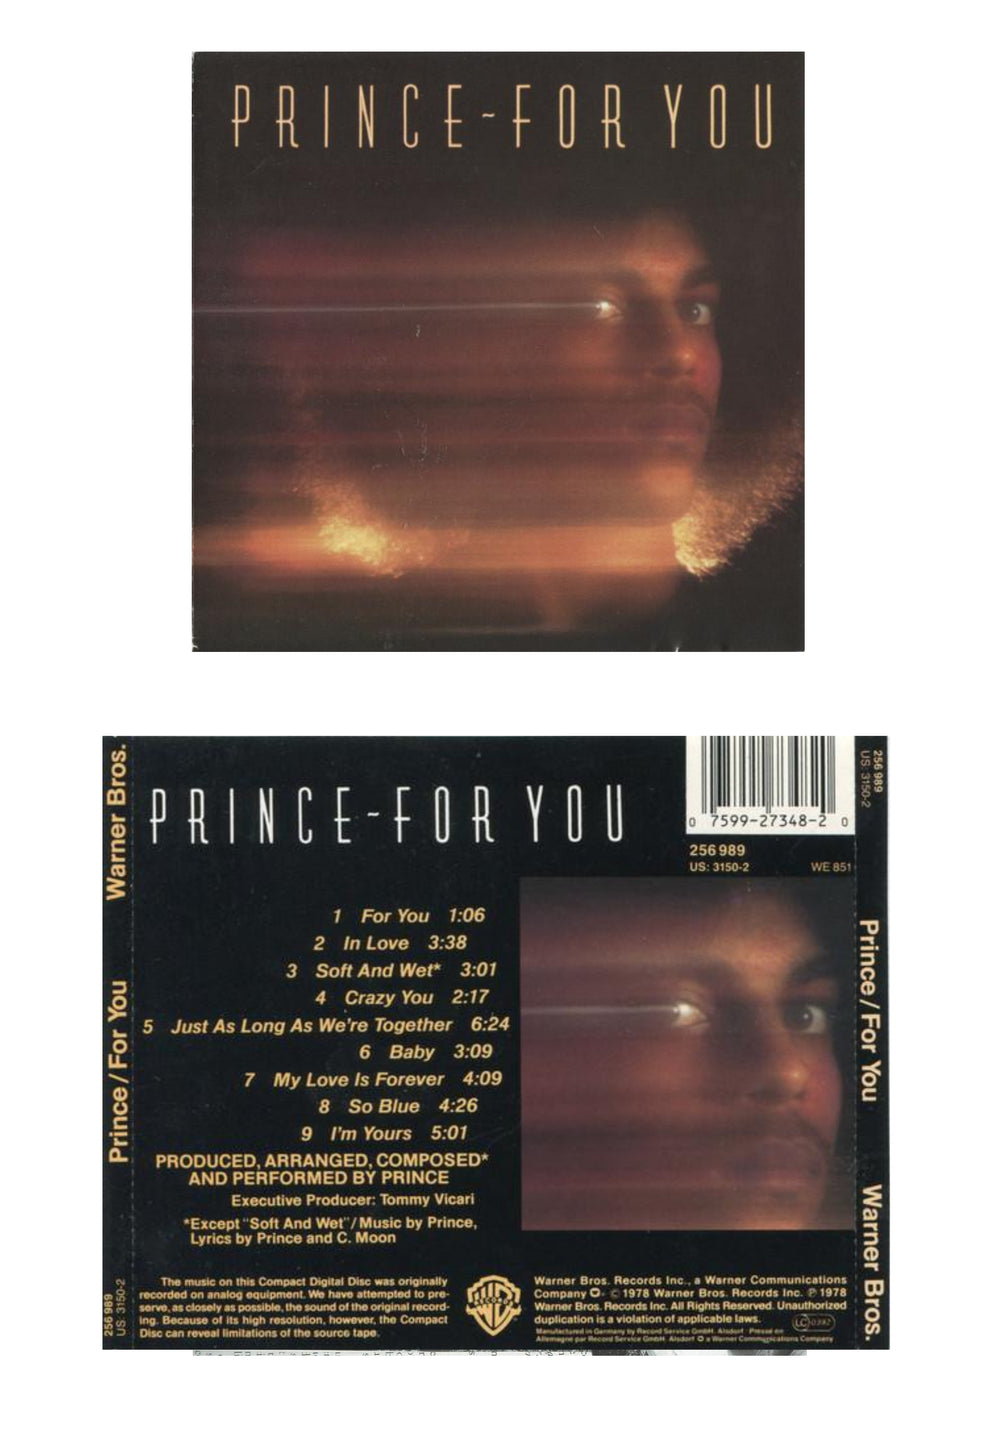 Prince – For You CD Album Reissue US Preloved: